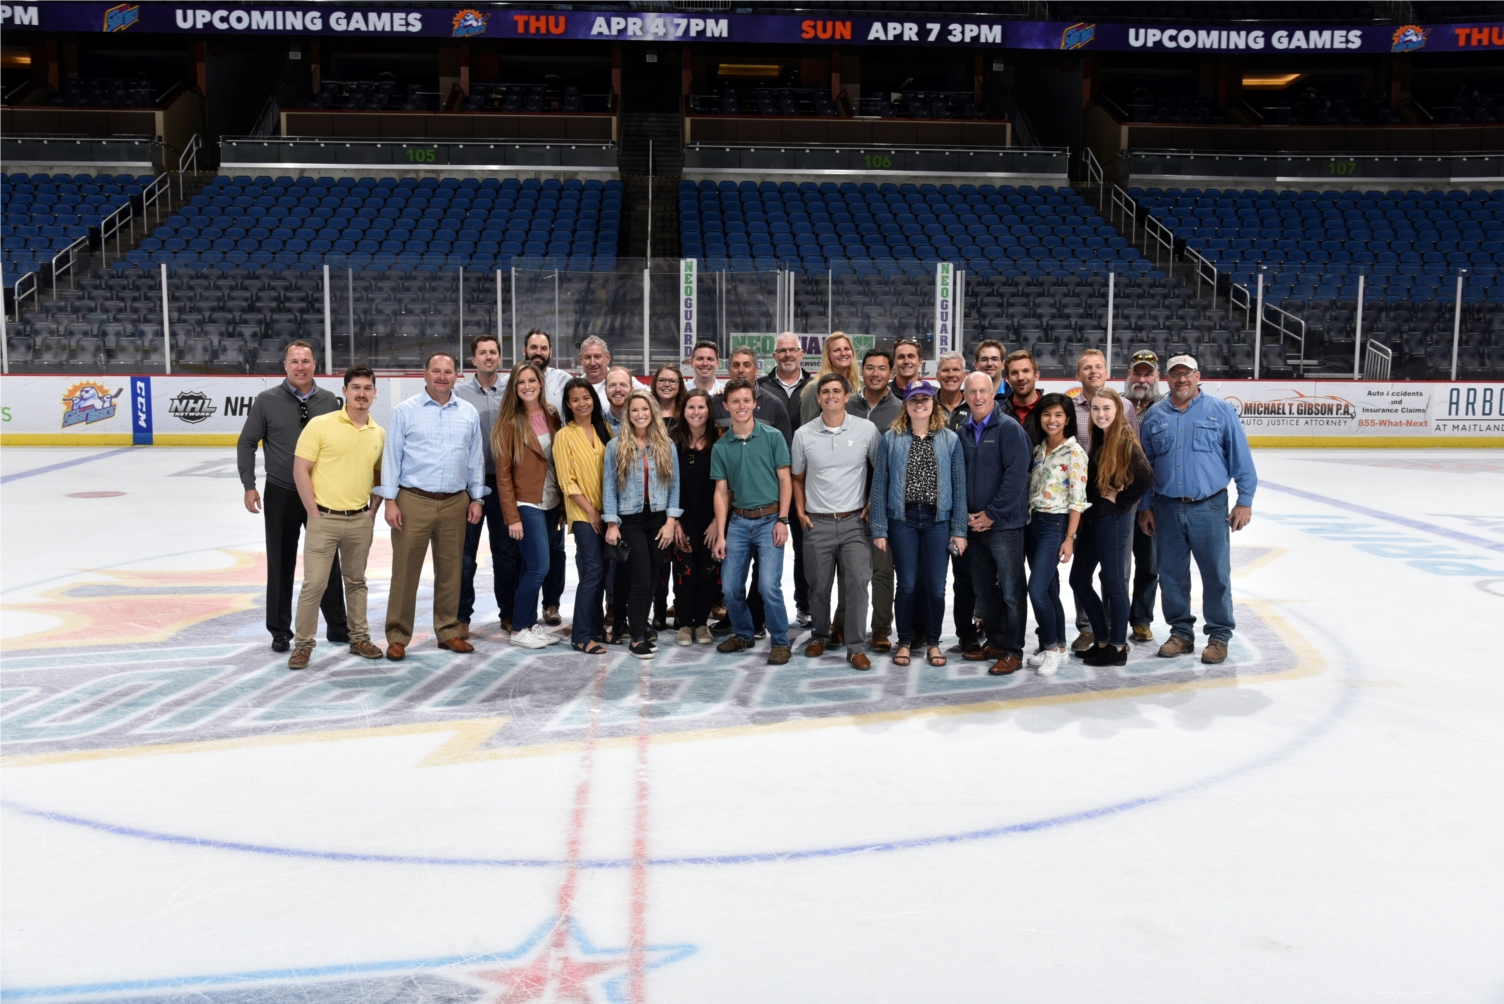 Company outing to the Solar Bears game.